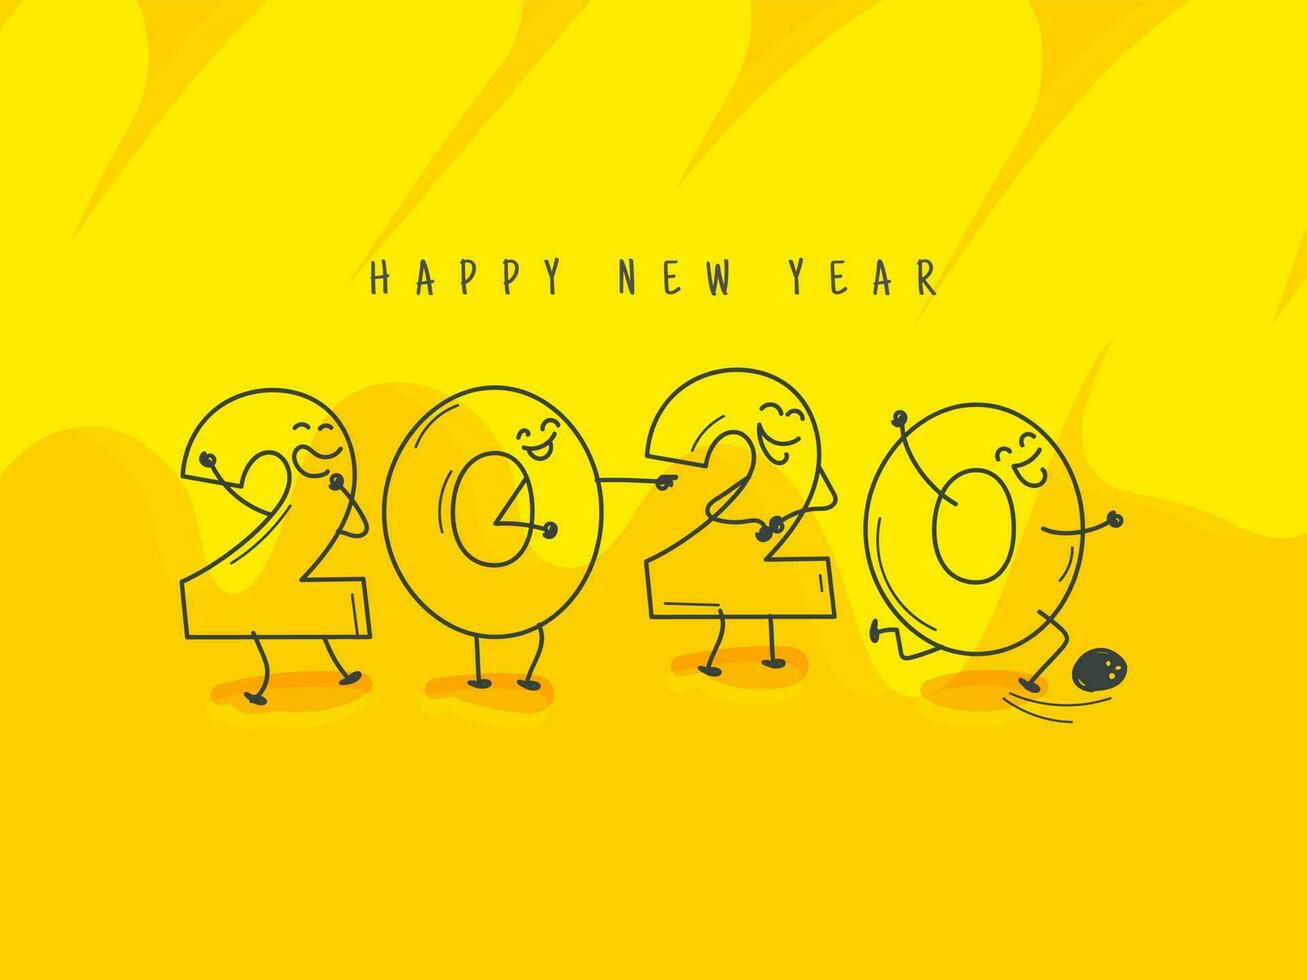 Funny cartoon number of 2020 on yellow background for Happy New ...